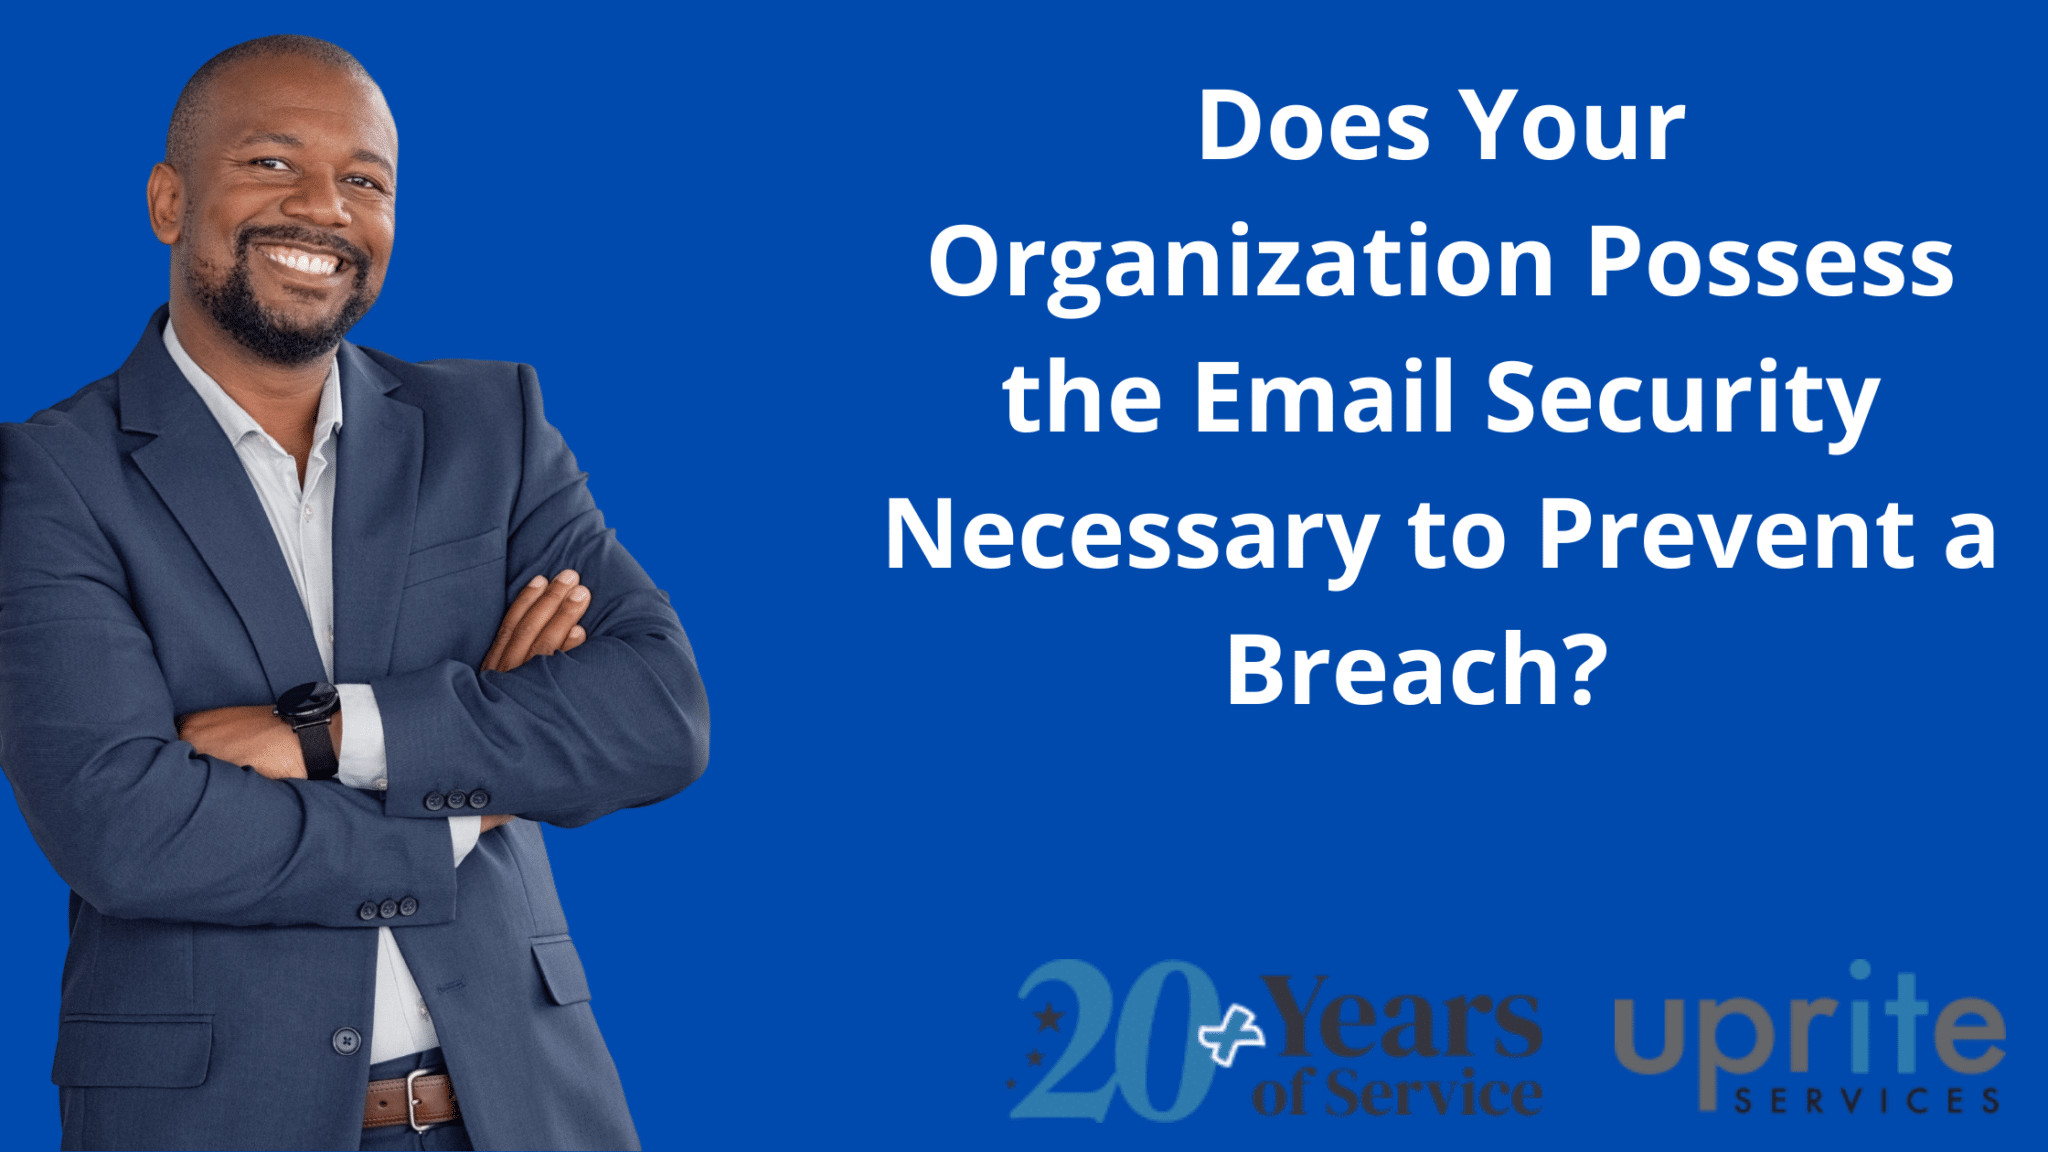 Does Your Organization Possess the Email Security Necessary to Prevent a Breach? 